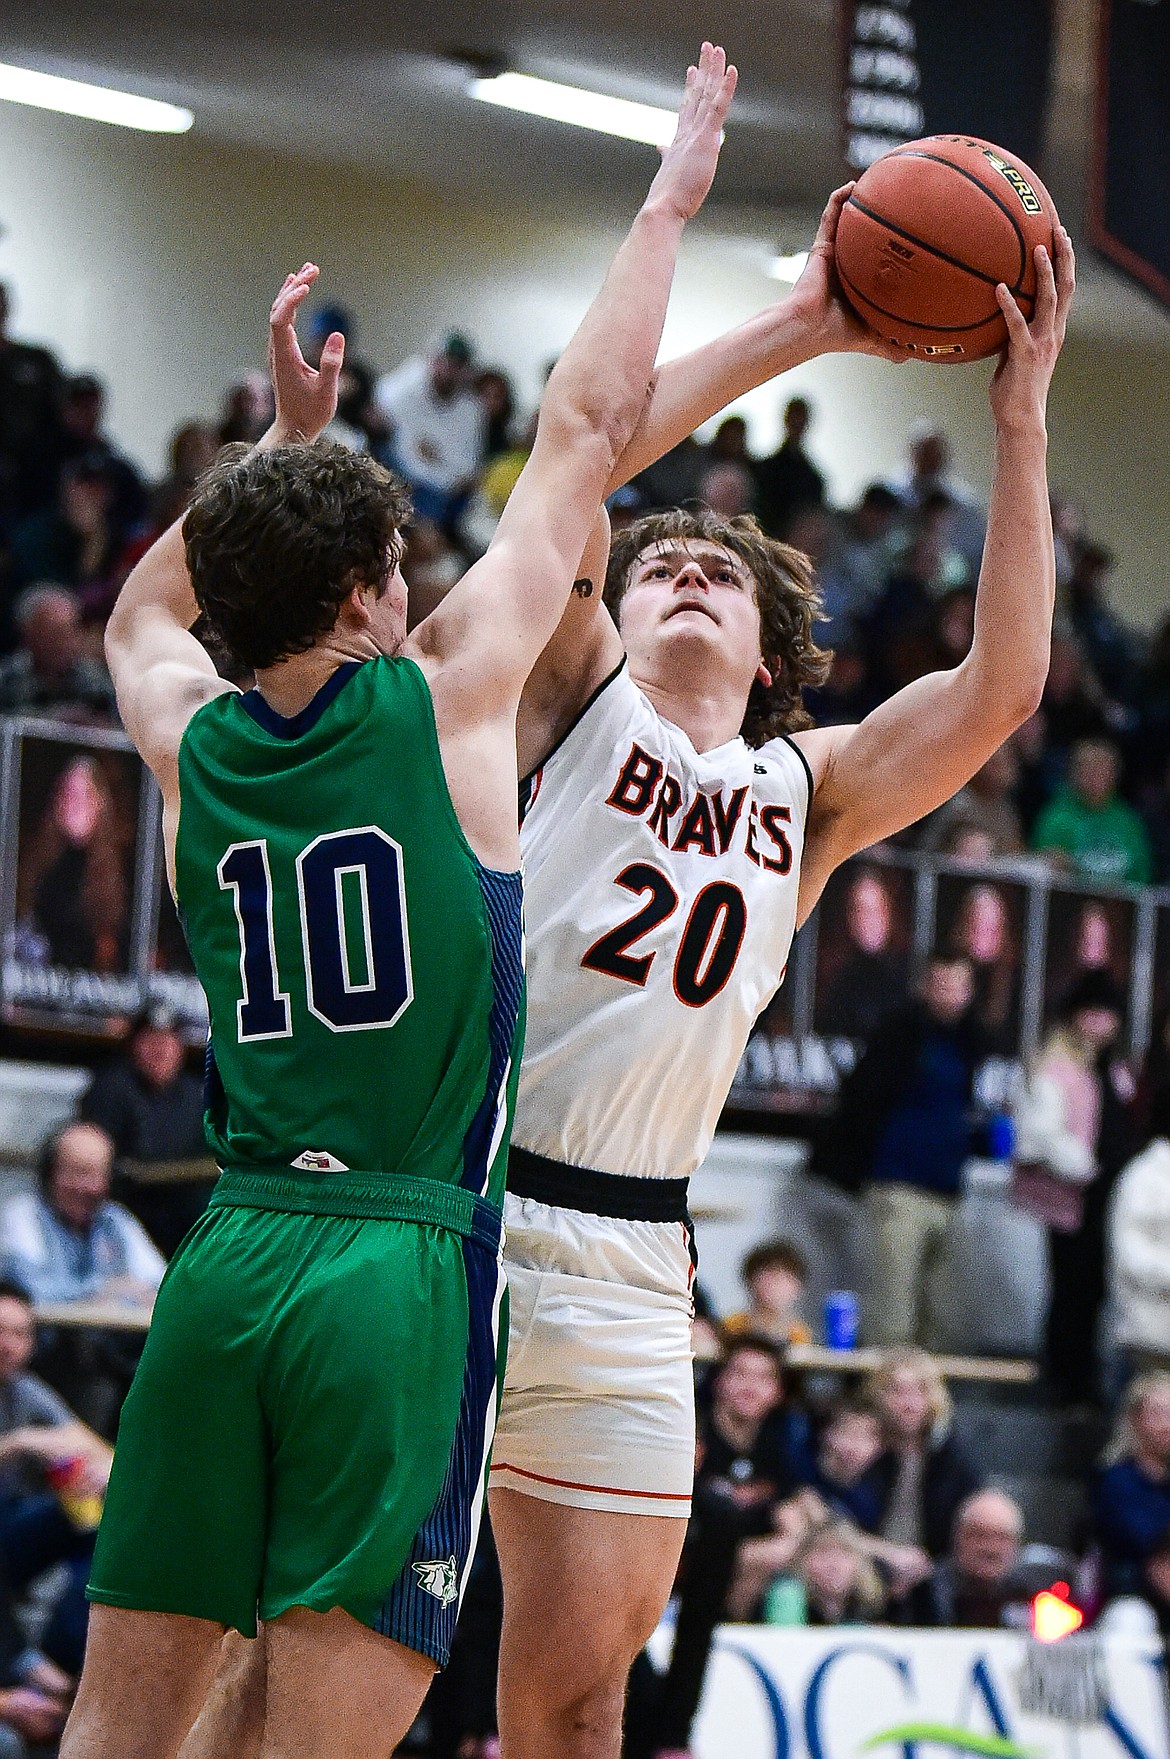 Flathead's Gabe Sims (20) shoots guarded by Glacier's Brantly Salmonsen (10) in the second half at Flathead High School on Friday, Jan. 19. (Casey Kreider/Daily Inter Lake)